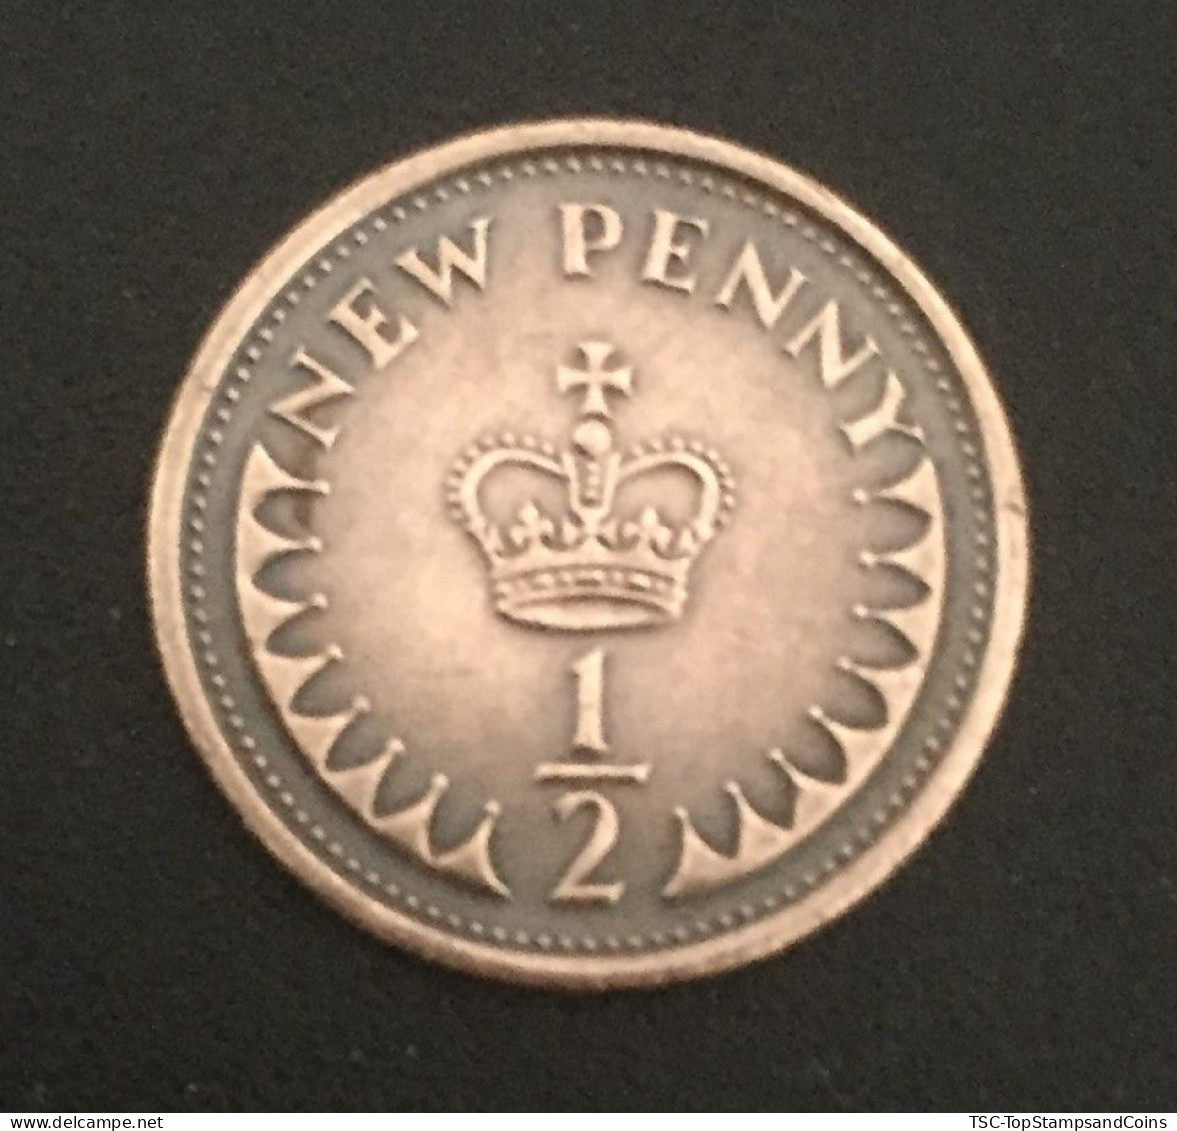 $$GB400 - Queen Elizabeth II - 1/2 New Penny Coin - Great-Britain - 1976 - 1/2 Penny & 1/2 New Penny